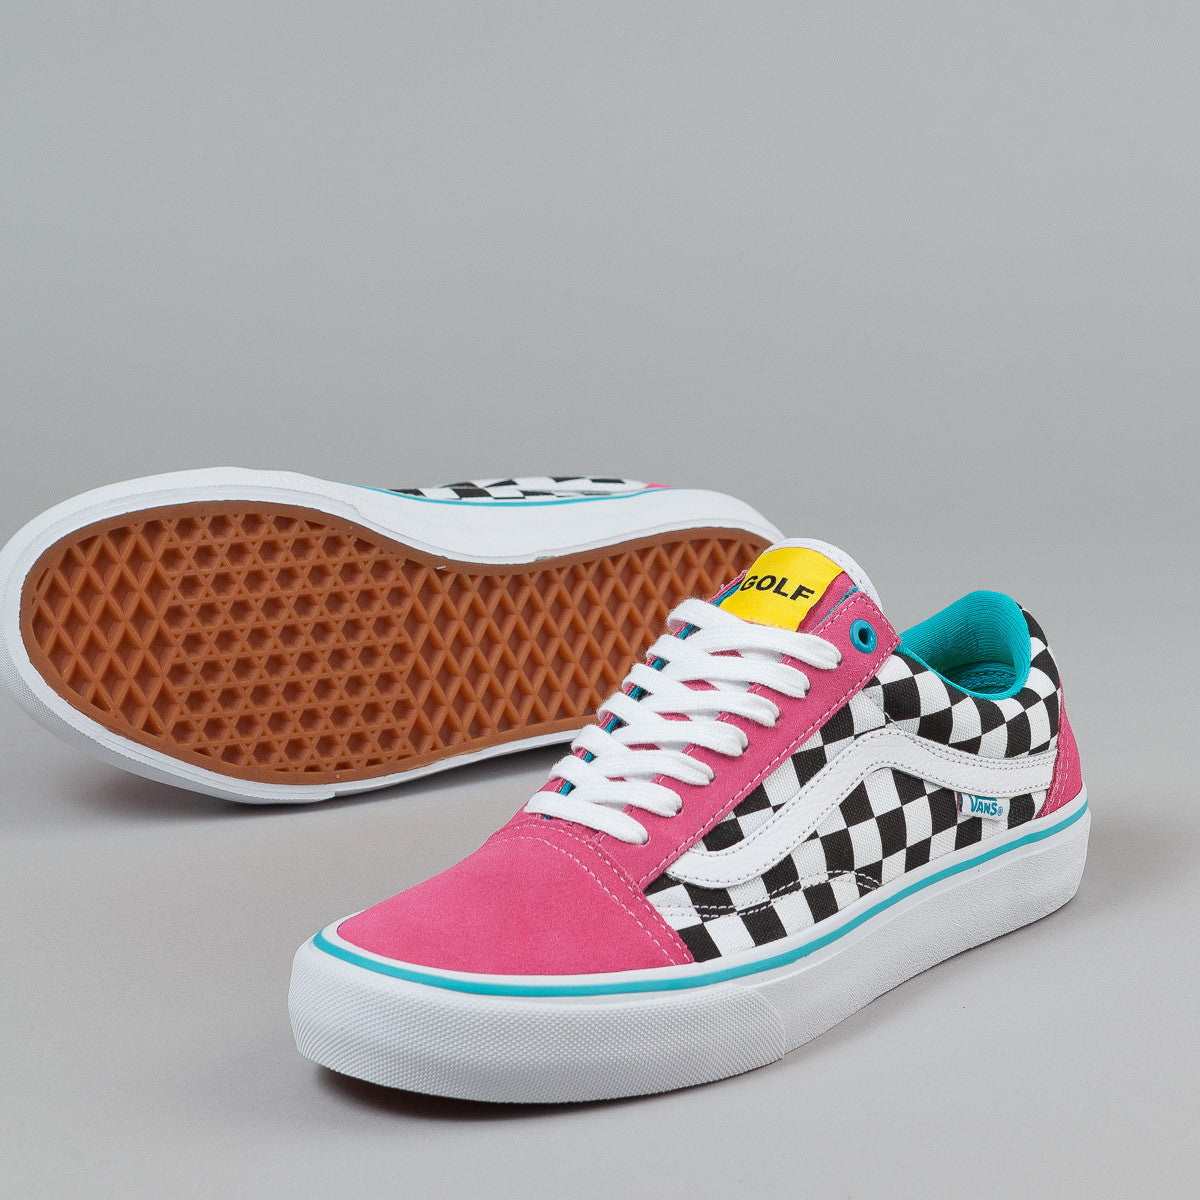 Golf Wang Vans Black / It's as colorful ever, and three of the four styles.